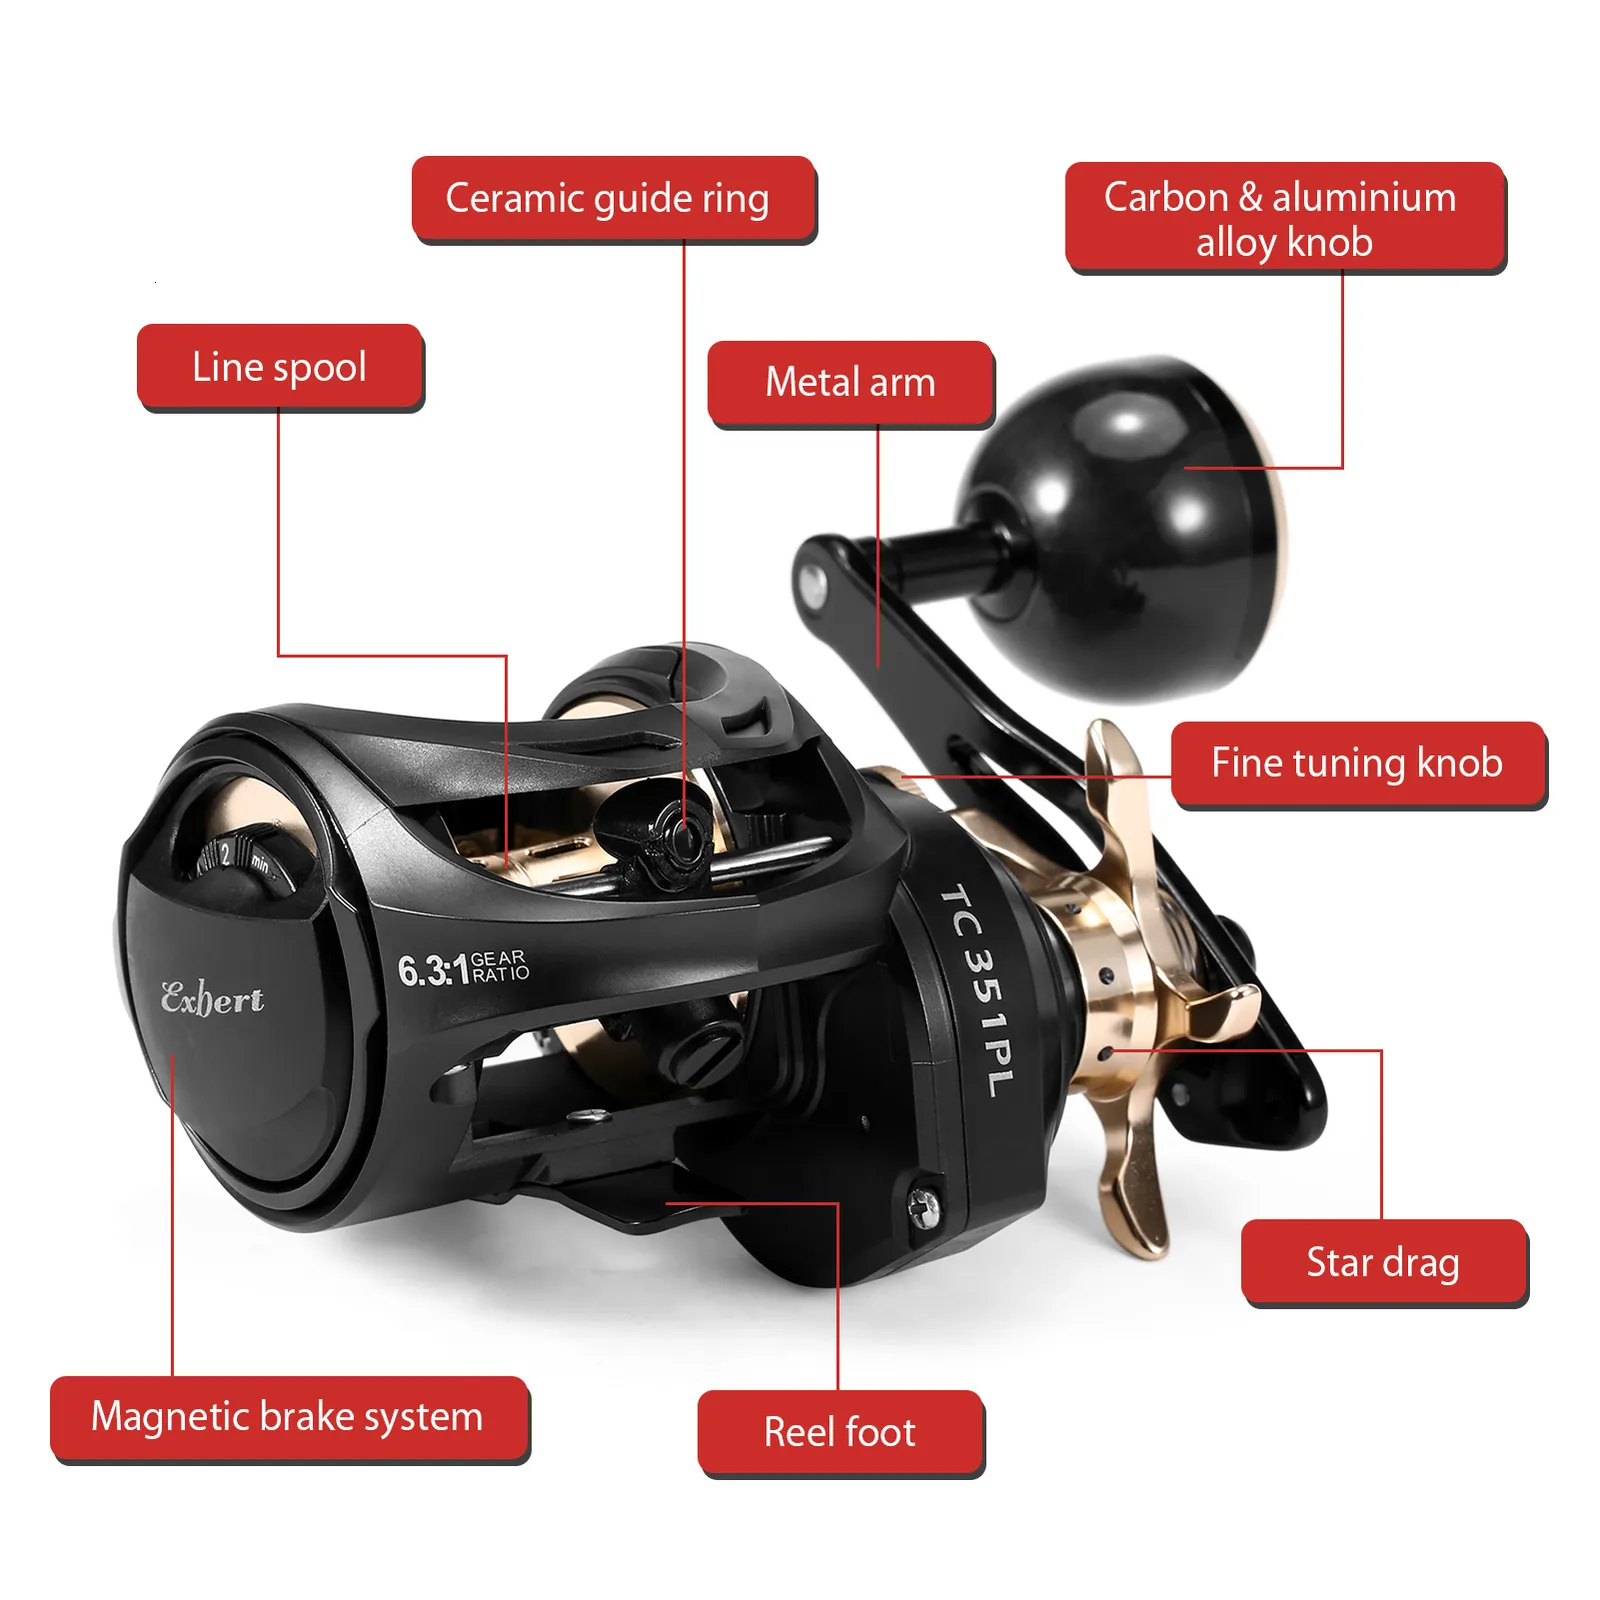 EXBERT Carbon Fiber Baitcasting Okuma Reels 91BB High Speed Fishing Reels  With 6.3/1 Gear Ratio, Magnetic Brake System, And Batteries 230619 From  Wai05, $46.24